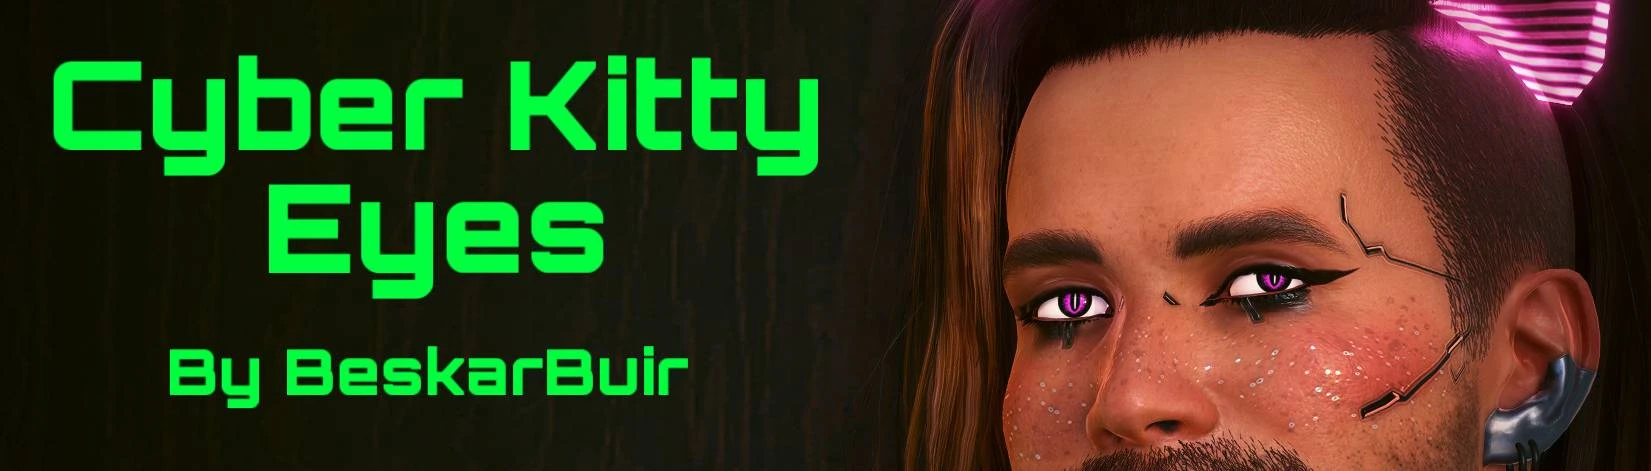 Kala's Eyes Collection at Cyberpunk 2077 Nexus - Mods and community